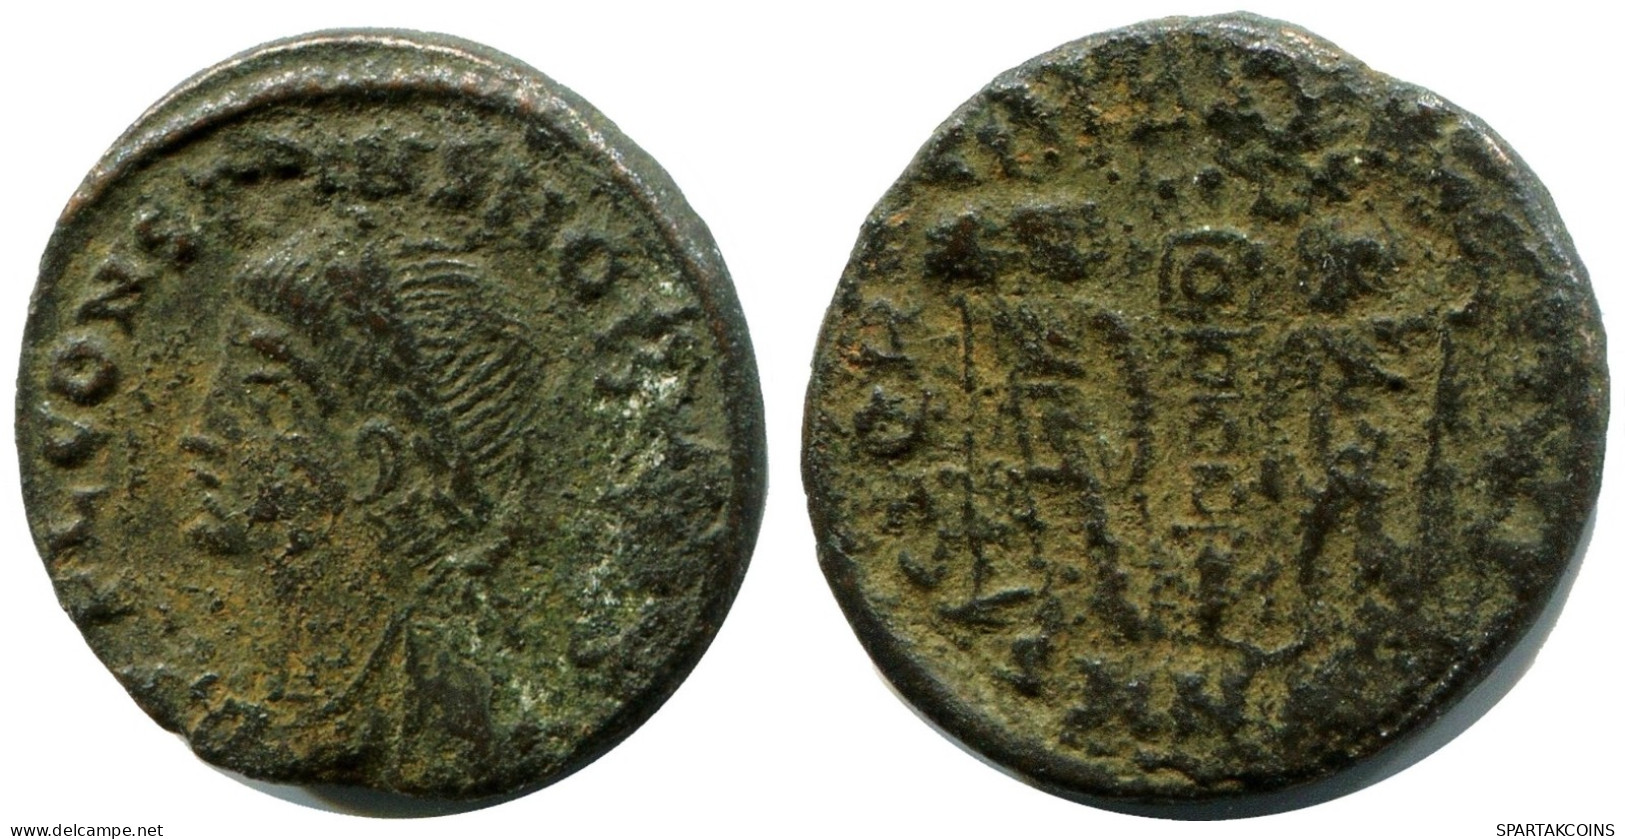 CONSTANS MINTED IN NICOMEDIA FROM THE ROYAL ONTARIO MUSEUM #ANC11714.14.U.A - L'Empire Chrétien (307 à 363)